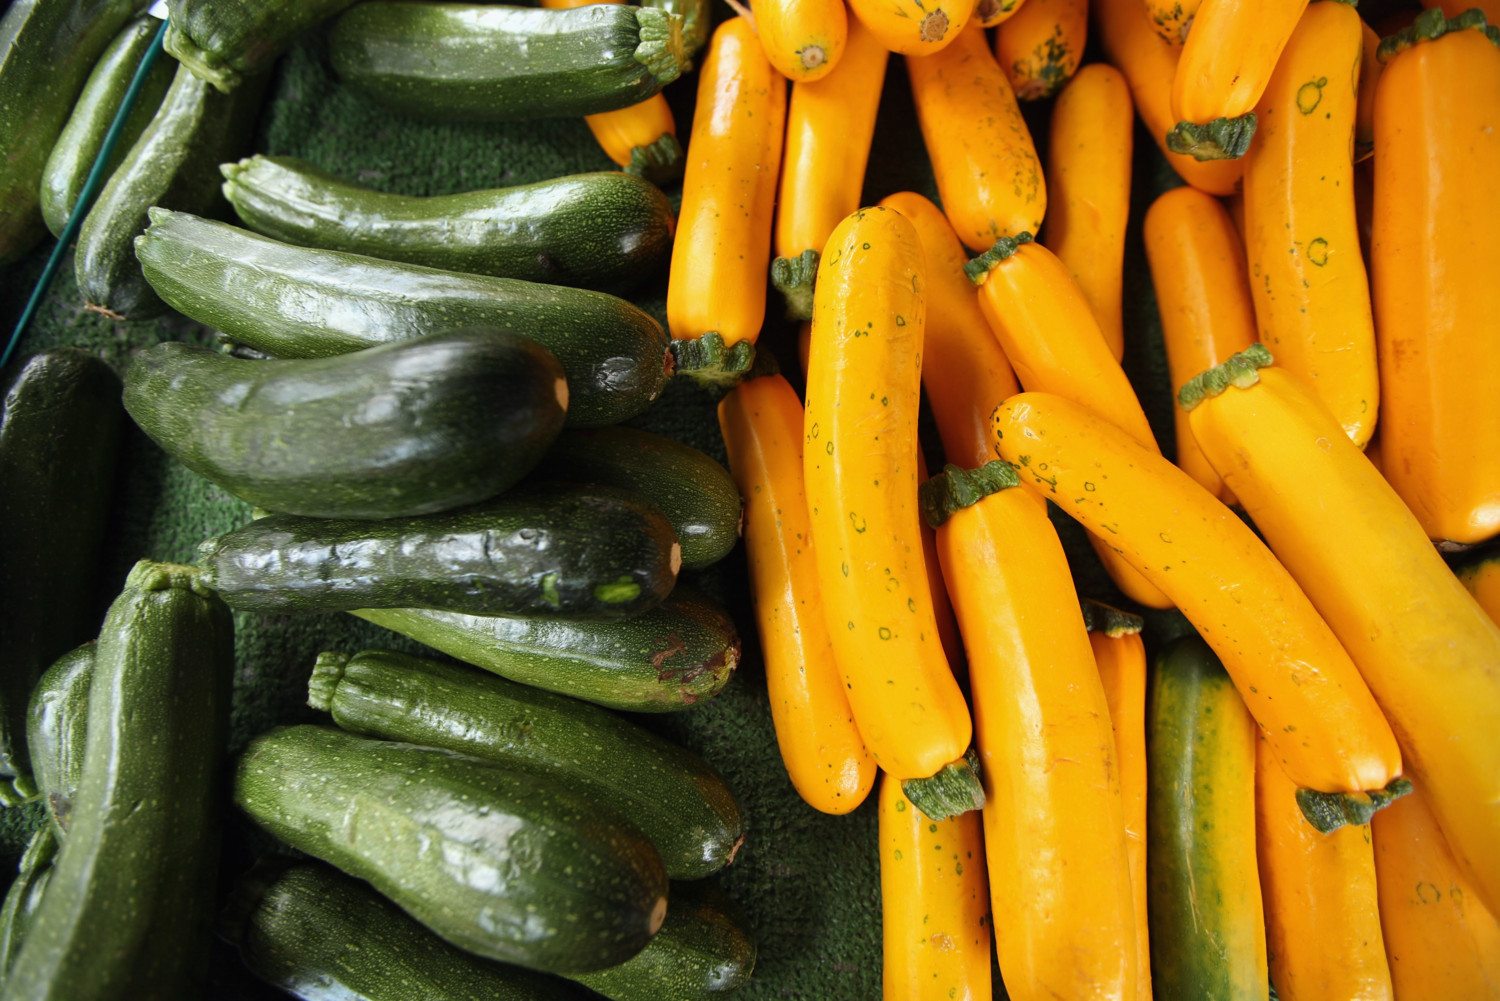 Toxic Squash Syndrome: Heres What To Know And How To Avoid It